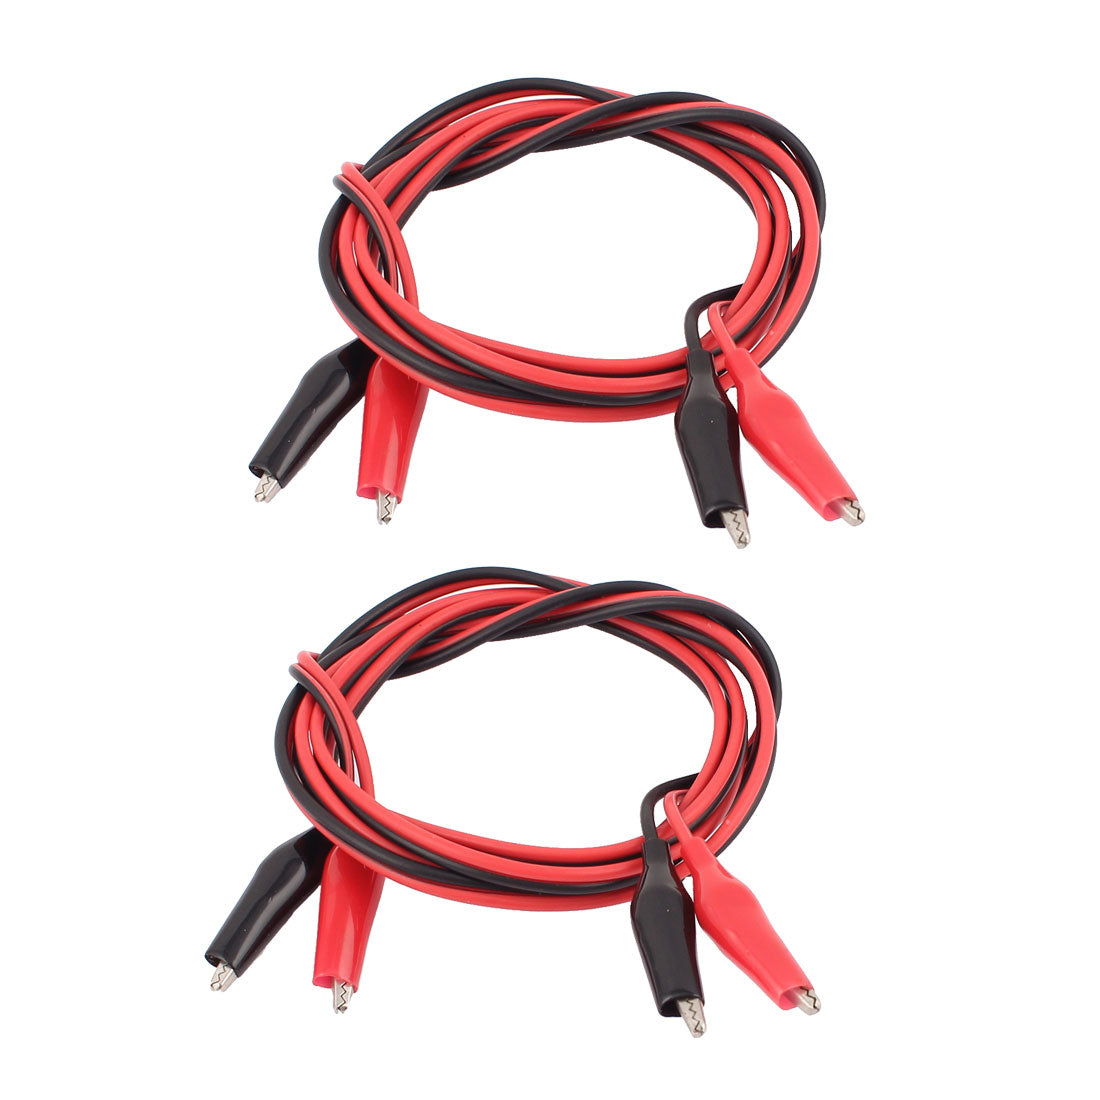 uxcell Uxcell 2pcs Black Red Plastic Insulation Cover Double Ended Test Leads Alligator Clip Jumper Probe Cable 1.5m Long